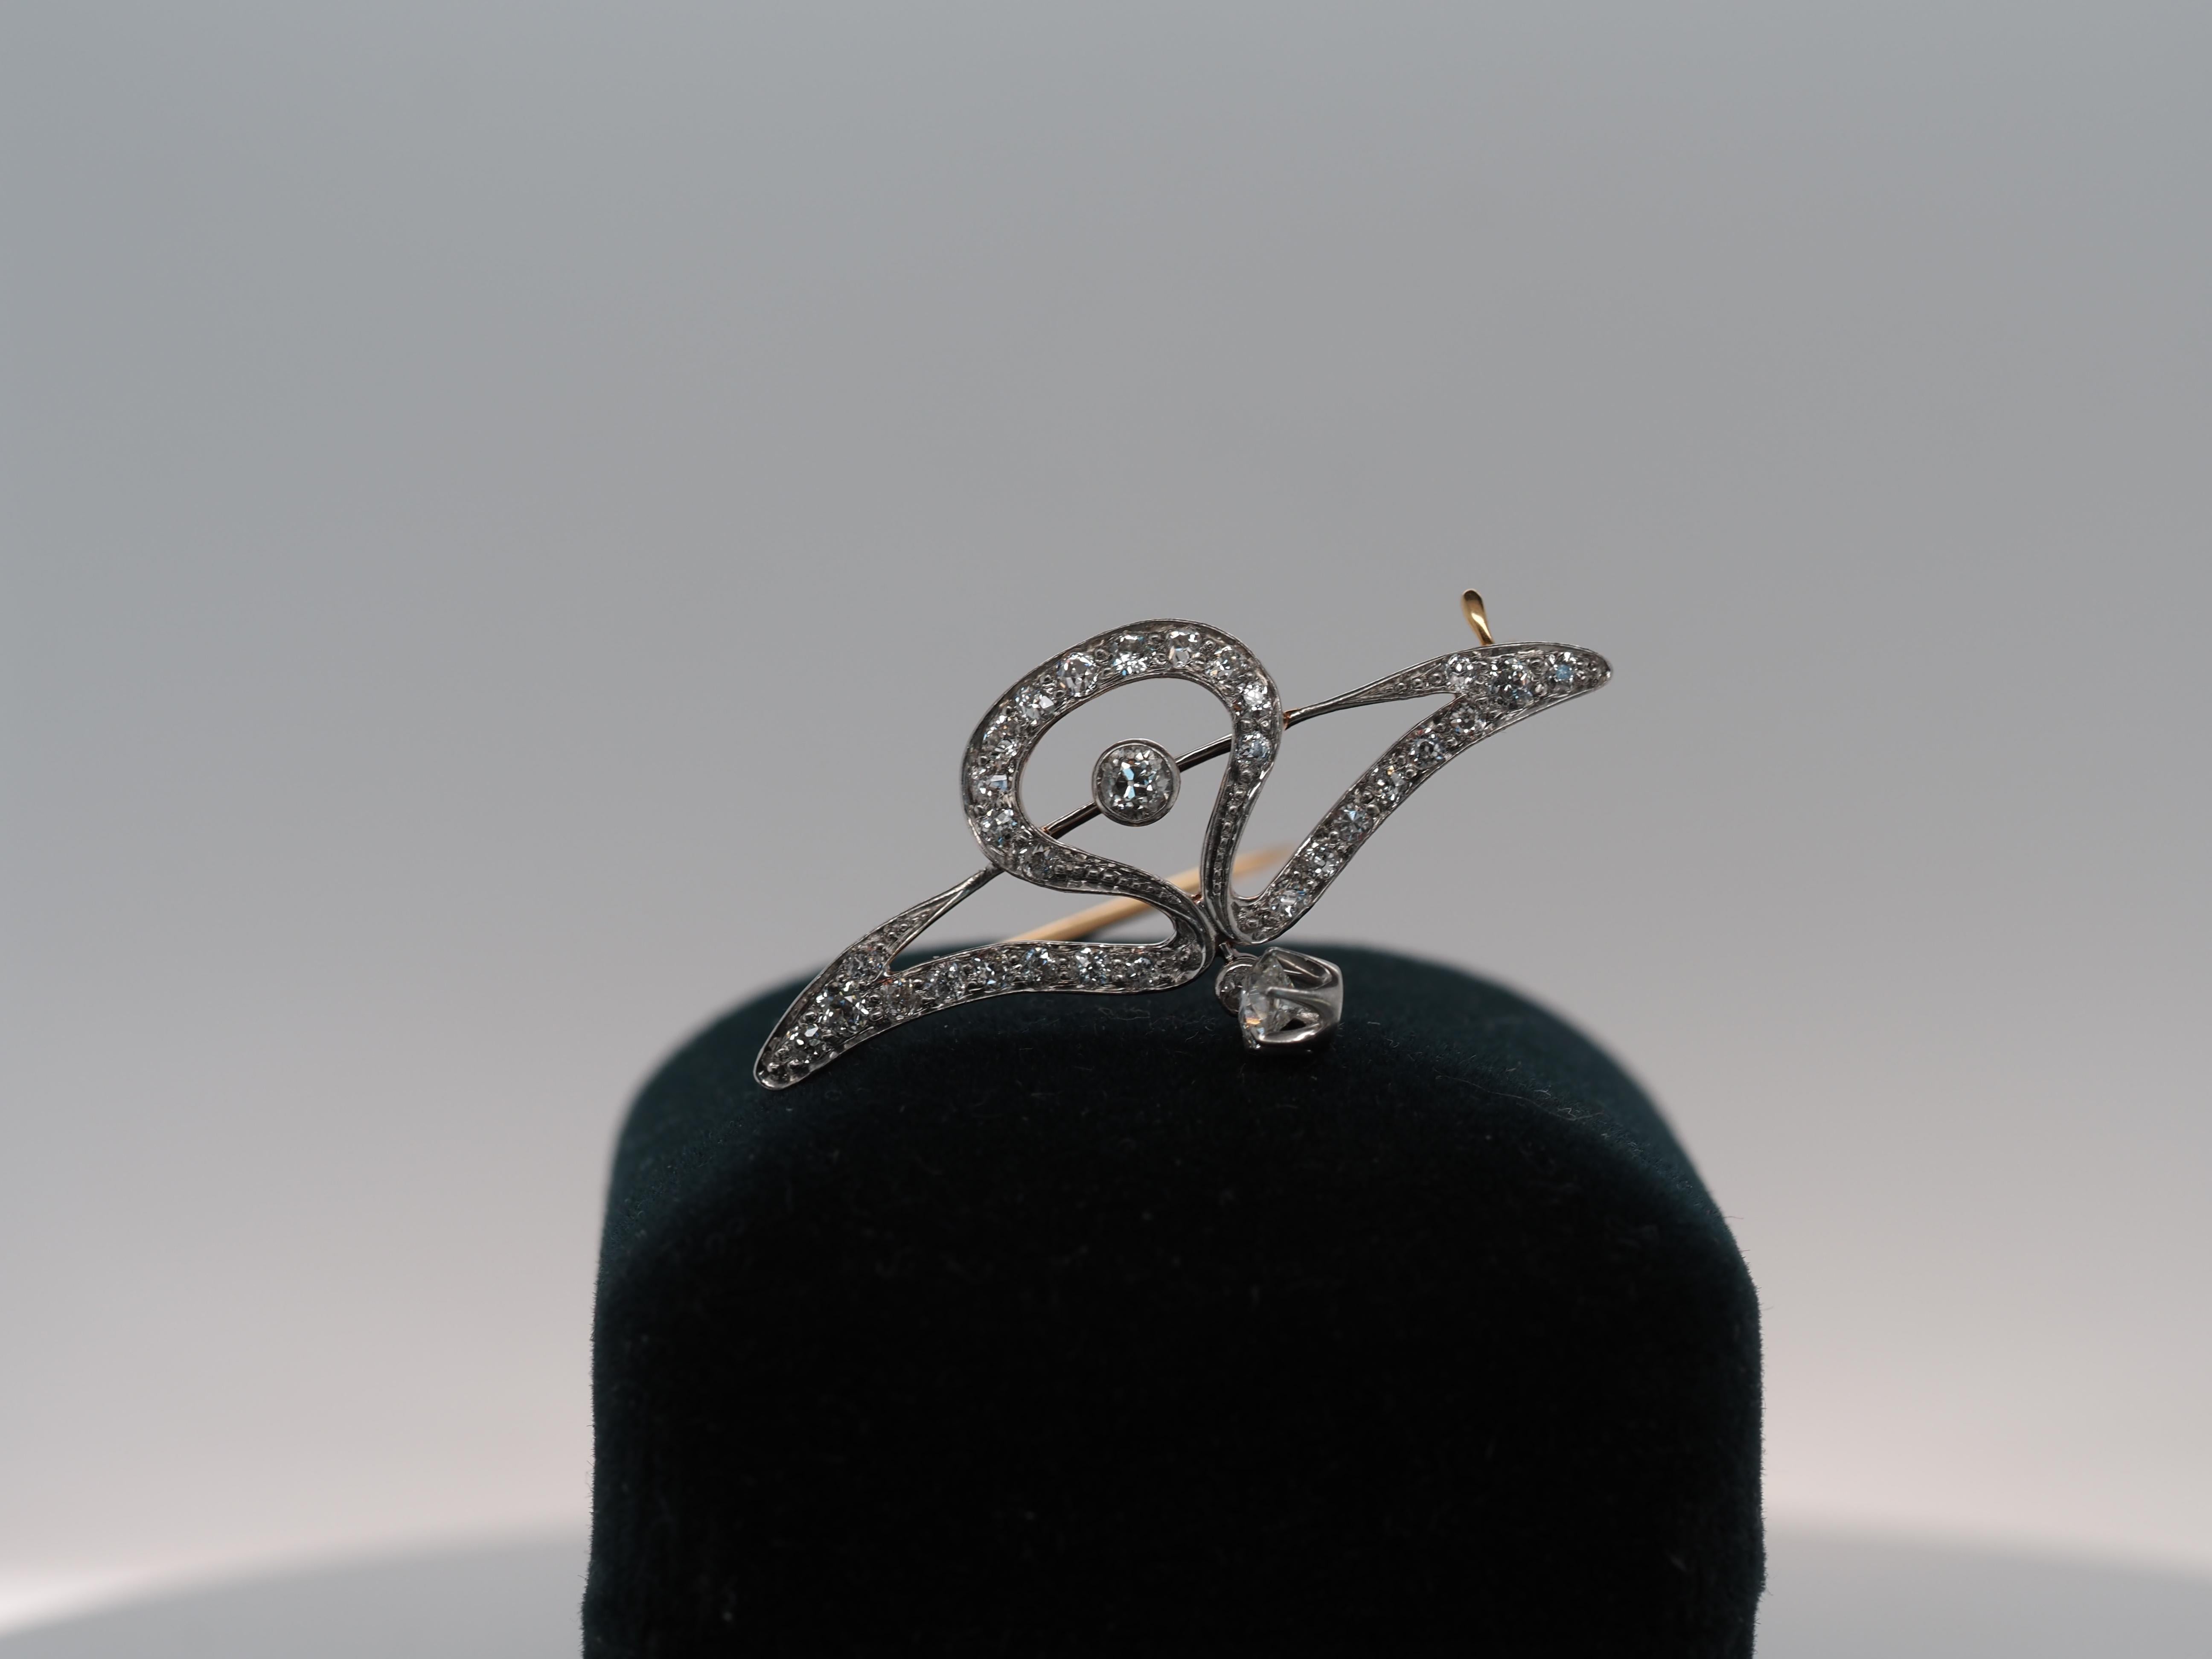 Item Details:
Metal Type: 14K Yellow Gold and Platinum [Hallmarked, and Tested]
Weight: 4.0 grams
Diamond Details:
Weight: .90ct, total weight
Cut: Old European Brilliant
Color: H
Clarity: VS
Pin Measurements: 1.5inch wide x 1inch long
Condition: